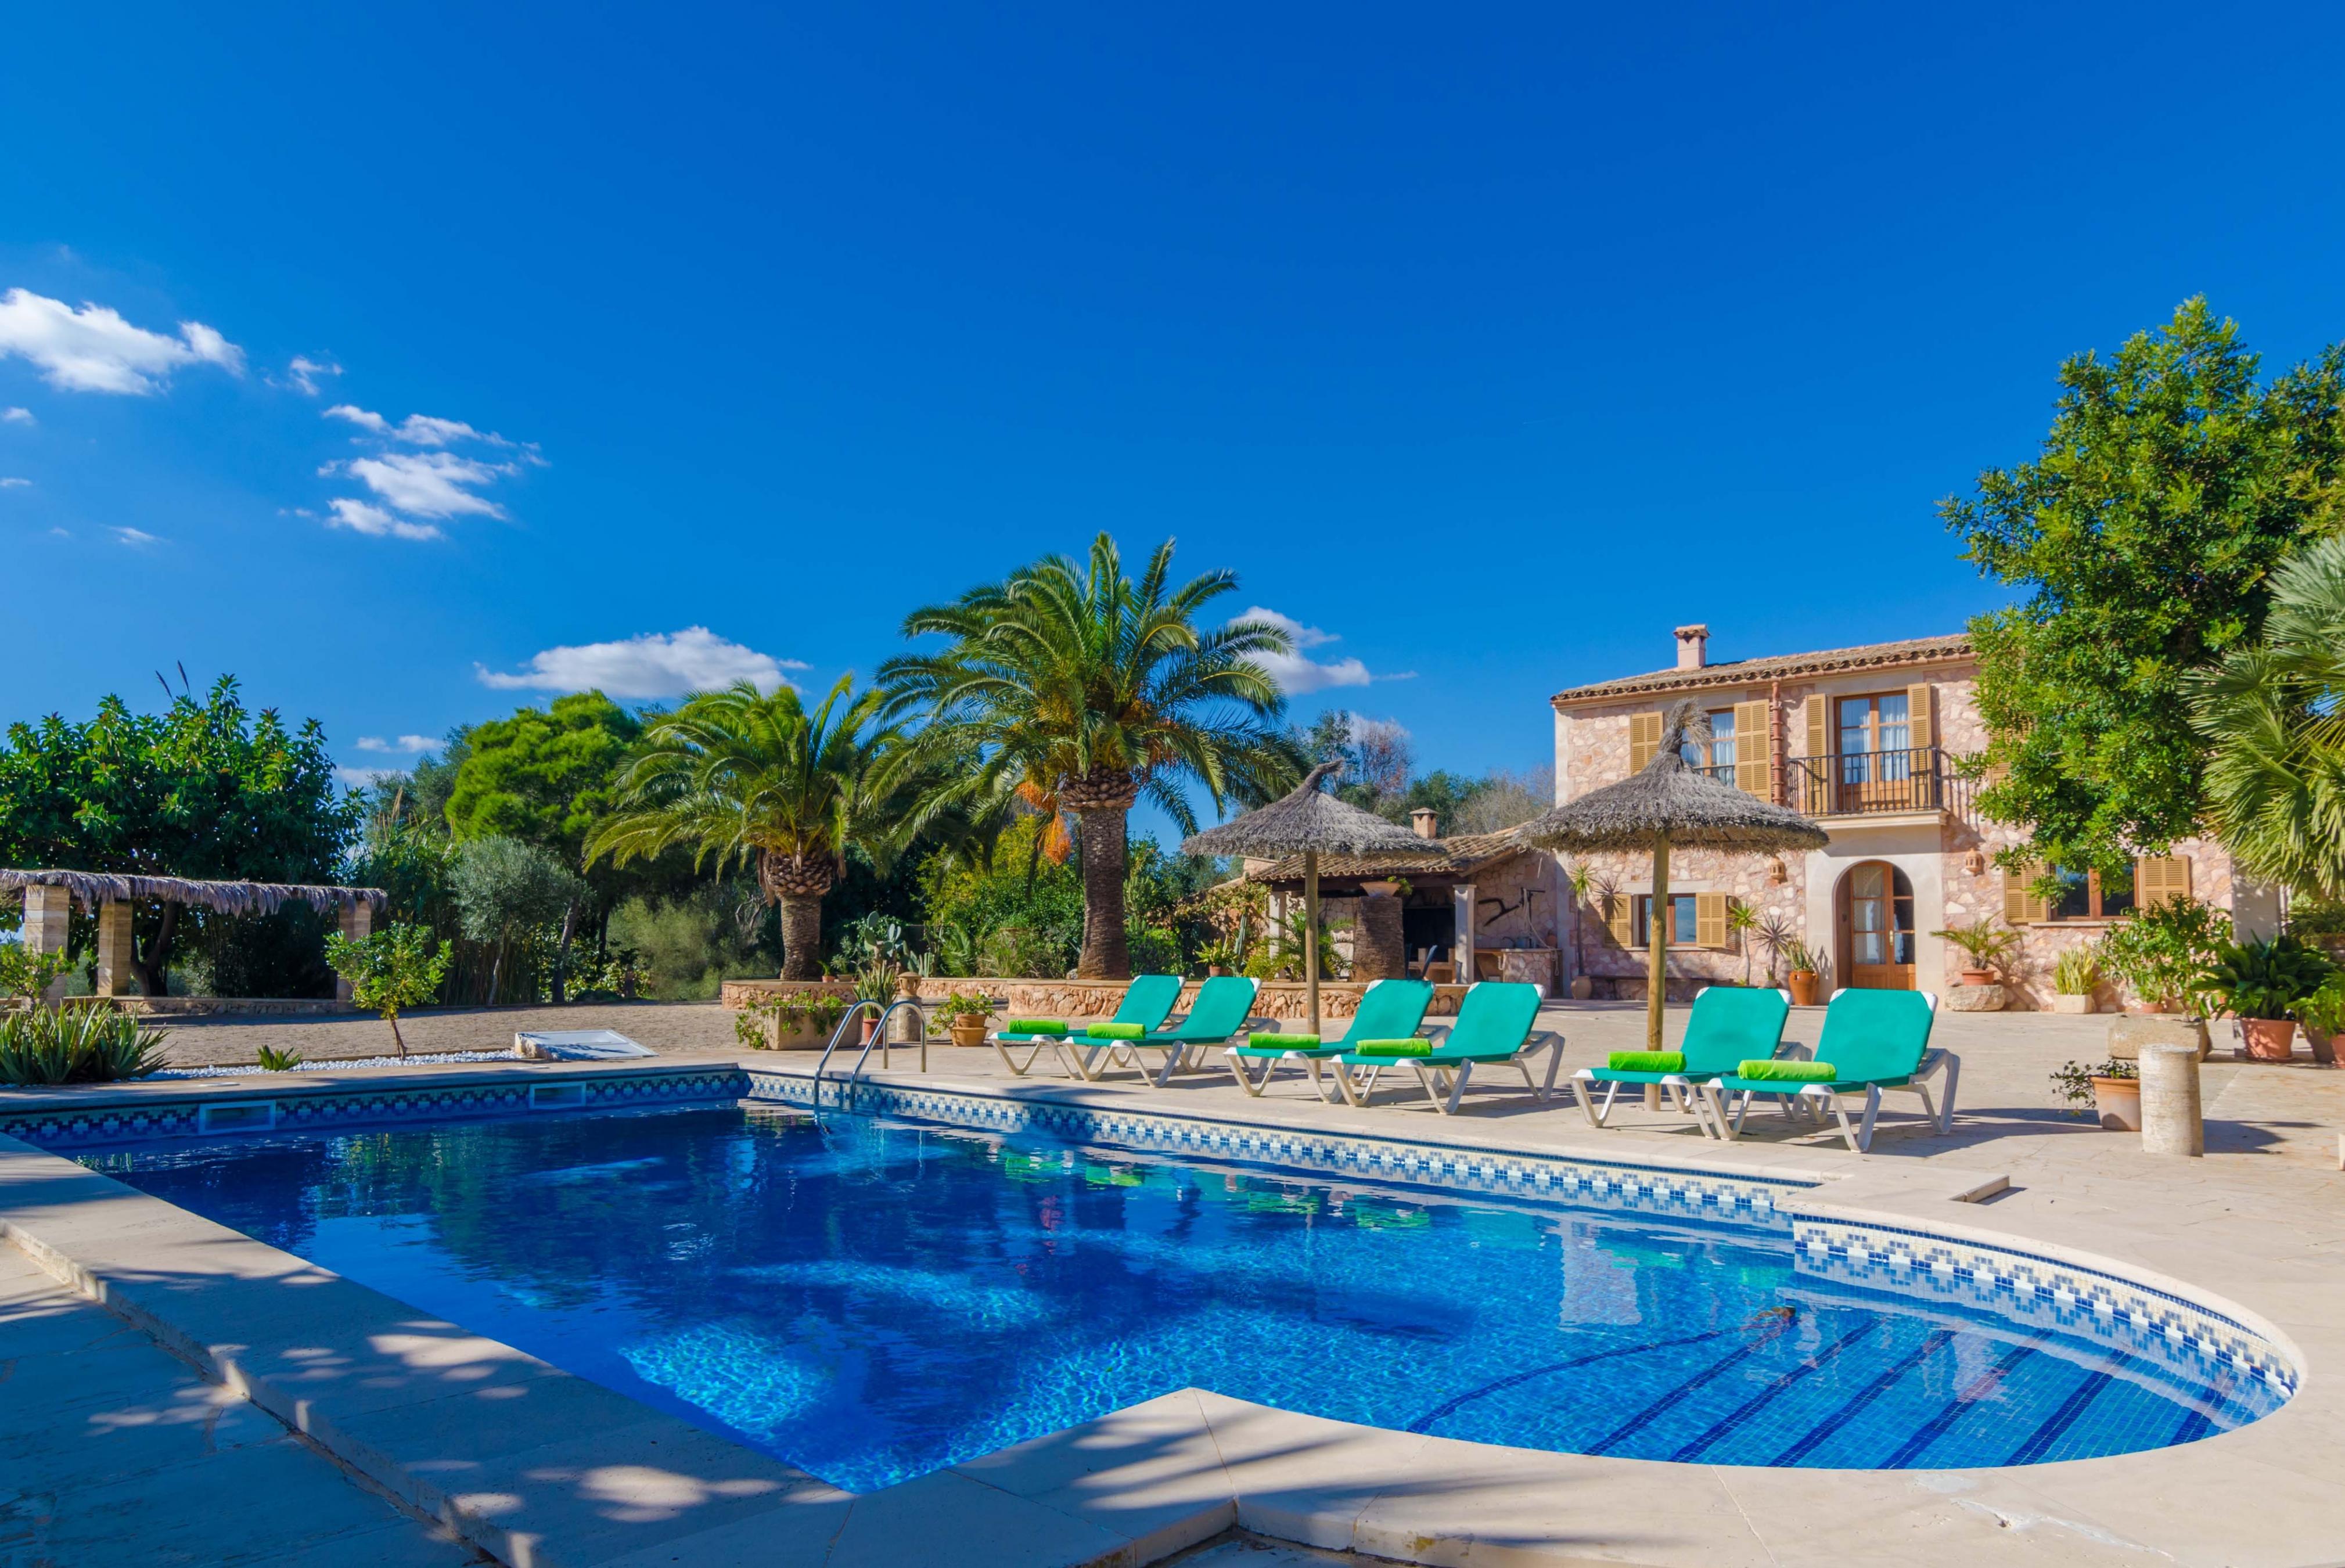 Property Image 1 - ES TURÓ - Great Majorcan finca with private pool, ideal for family holidays. Free WiFi